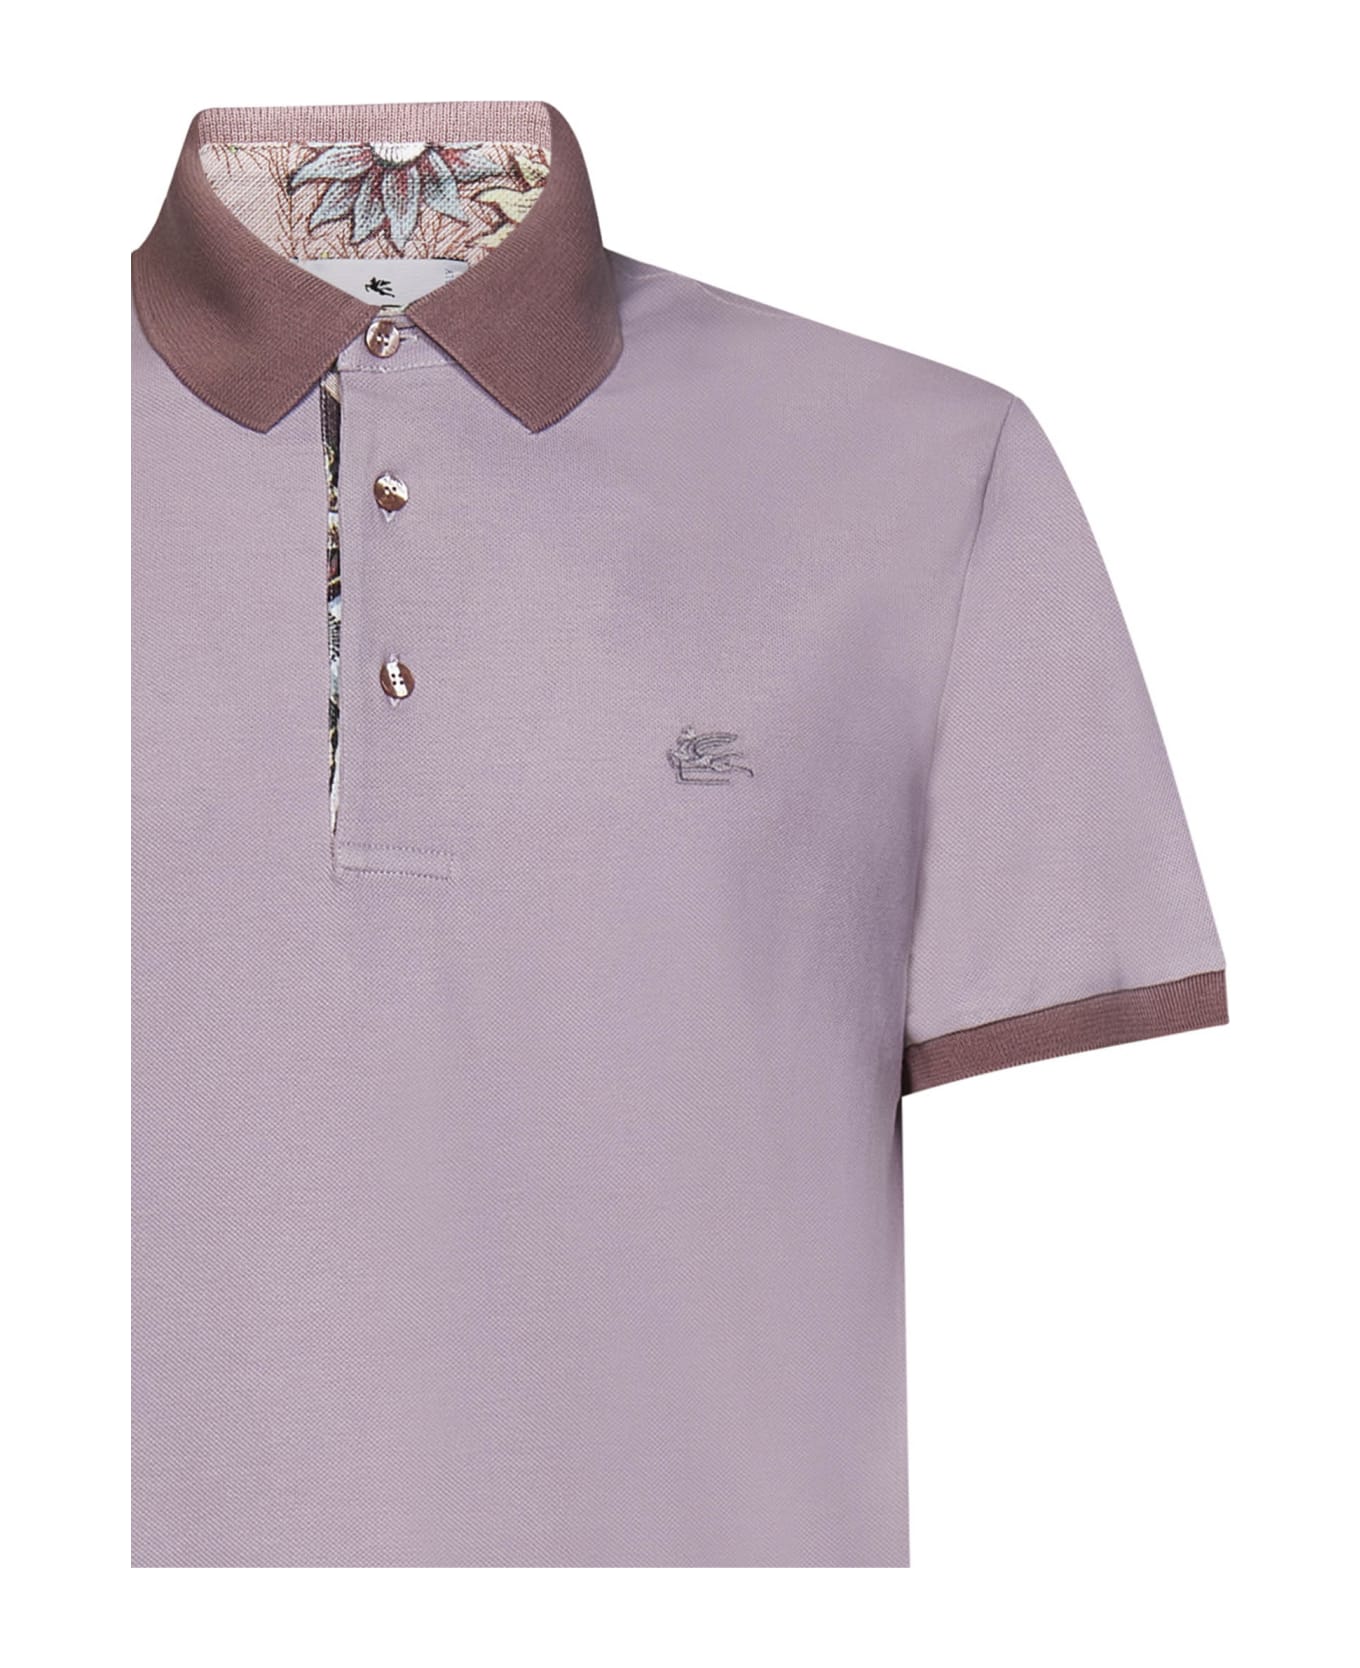 Etro Polo Shirt - Pink ポロシャツ